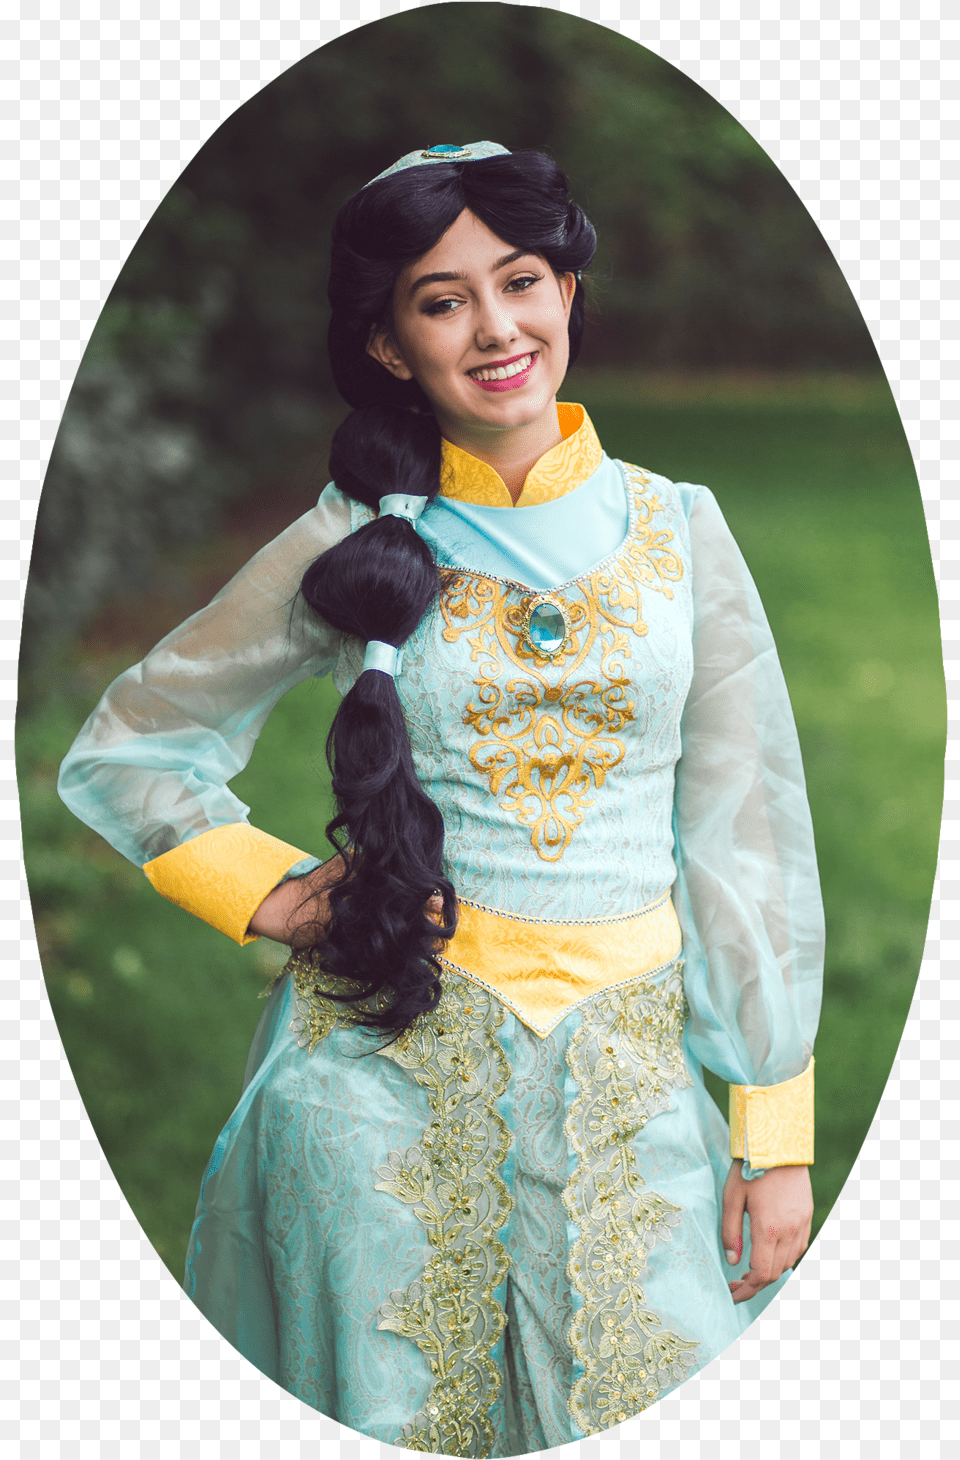 Jasmine Costume, Clothing, Dress, Photography, Formal Wear Png Image